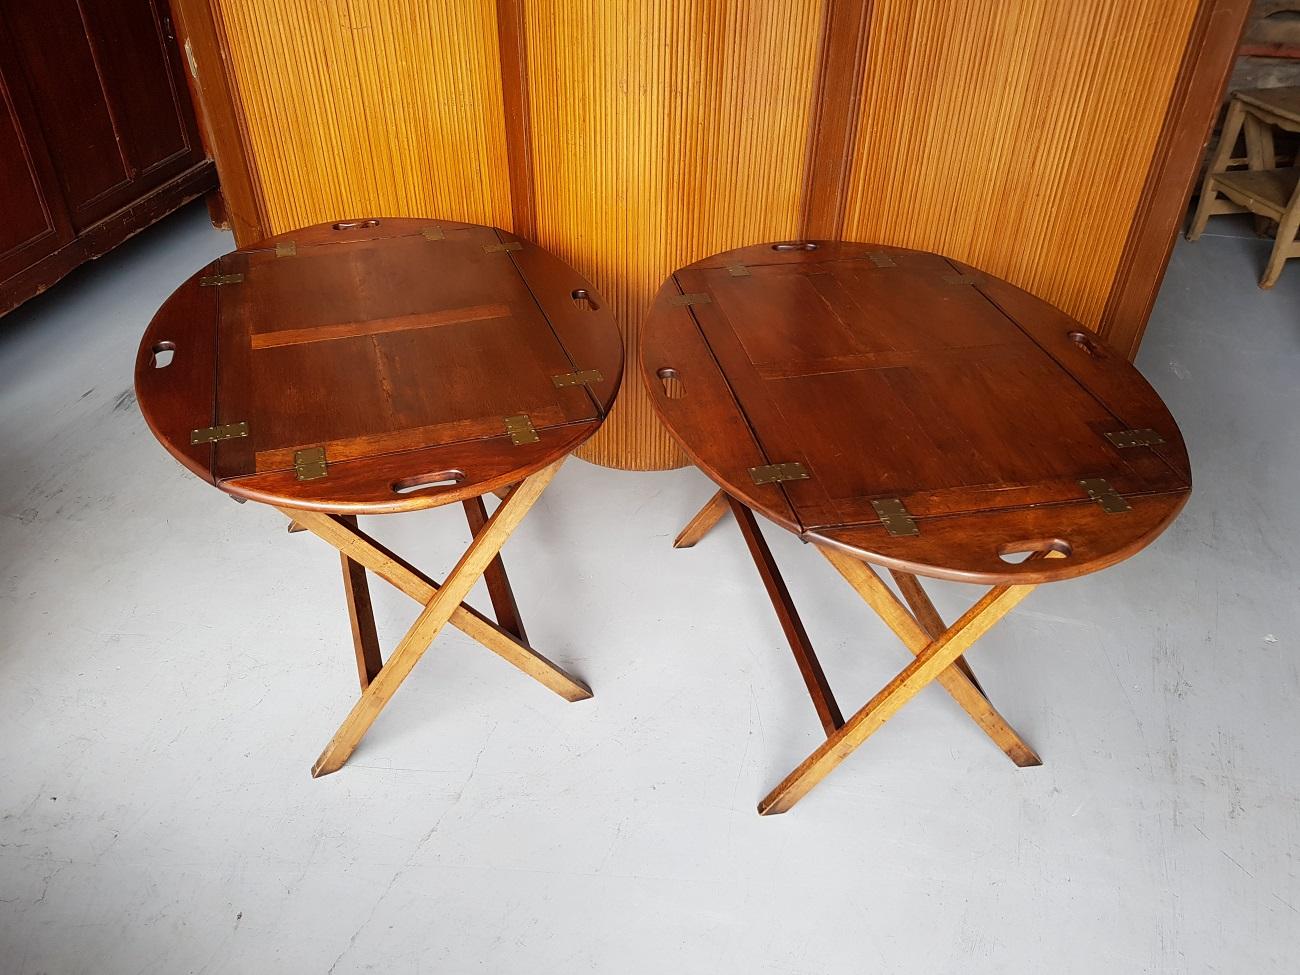 Set of two English mahogany Chippendale style butler tray side tables with detachable tray and foldable frame, both from the Second half of the 20th century (the top has some wear consistent by age and use).

The measurements are,
Depth 48-67 cm/